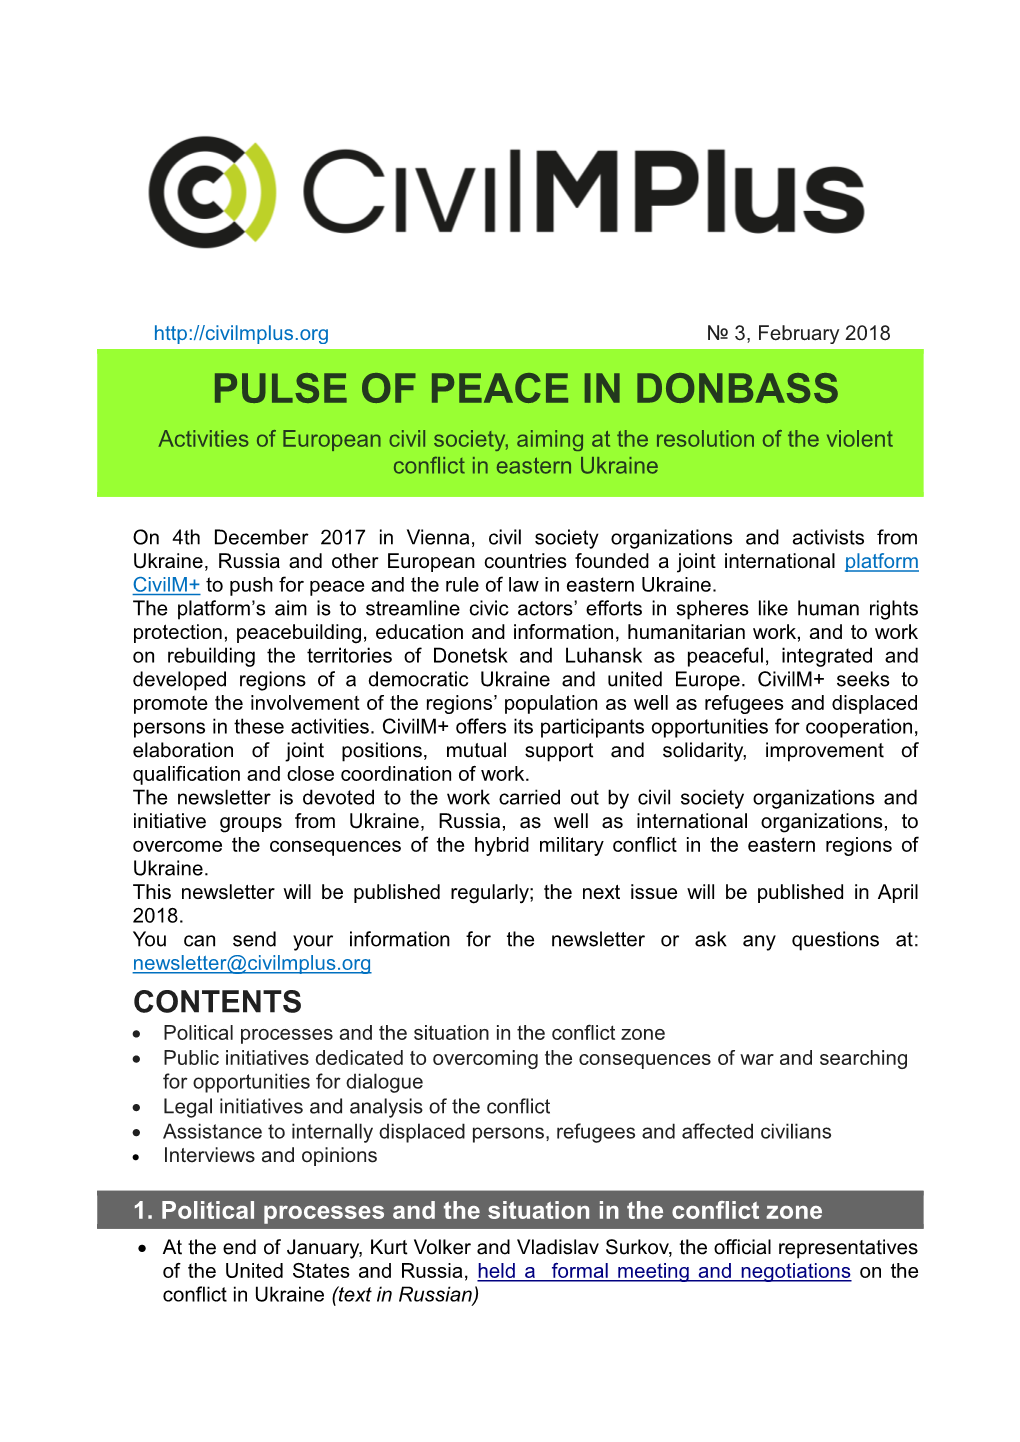 PULSE of PEACE in DONBASS Activities of European Civil Society, Aiming at the Resolution of the Violent Conflict in Eastern Ukraine